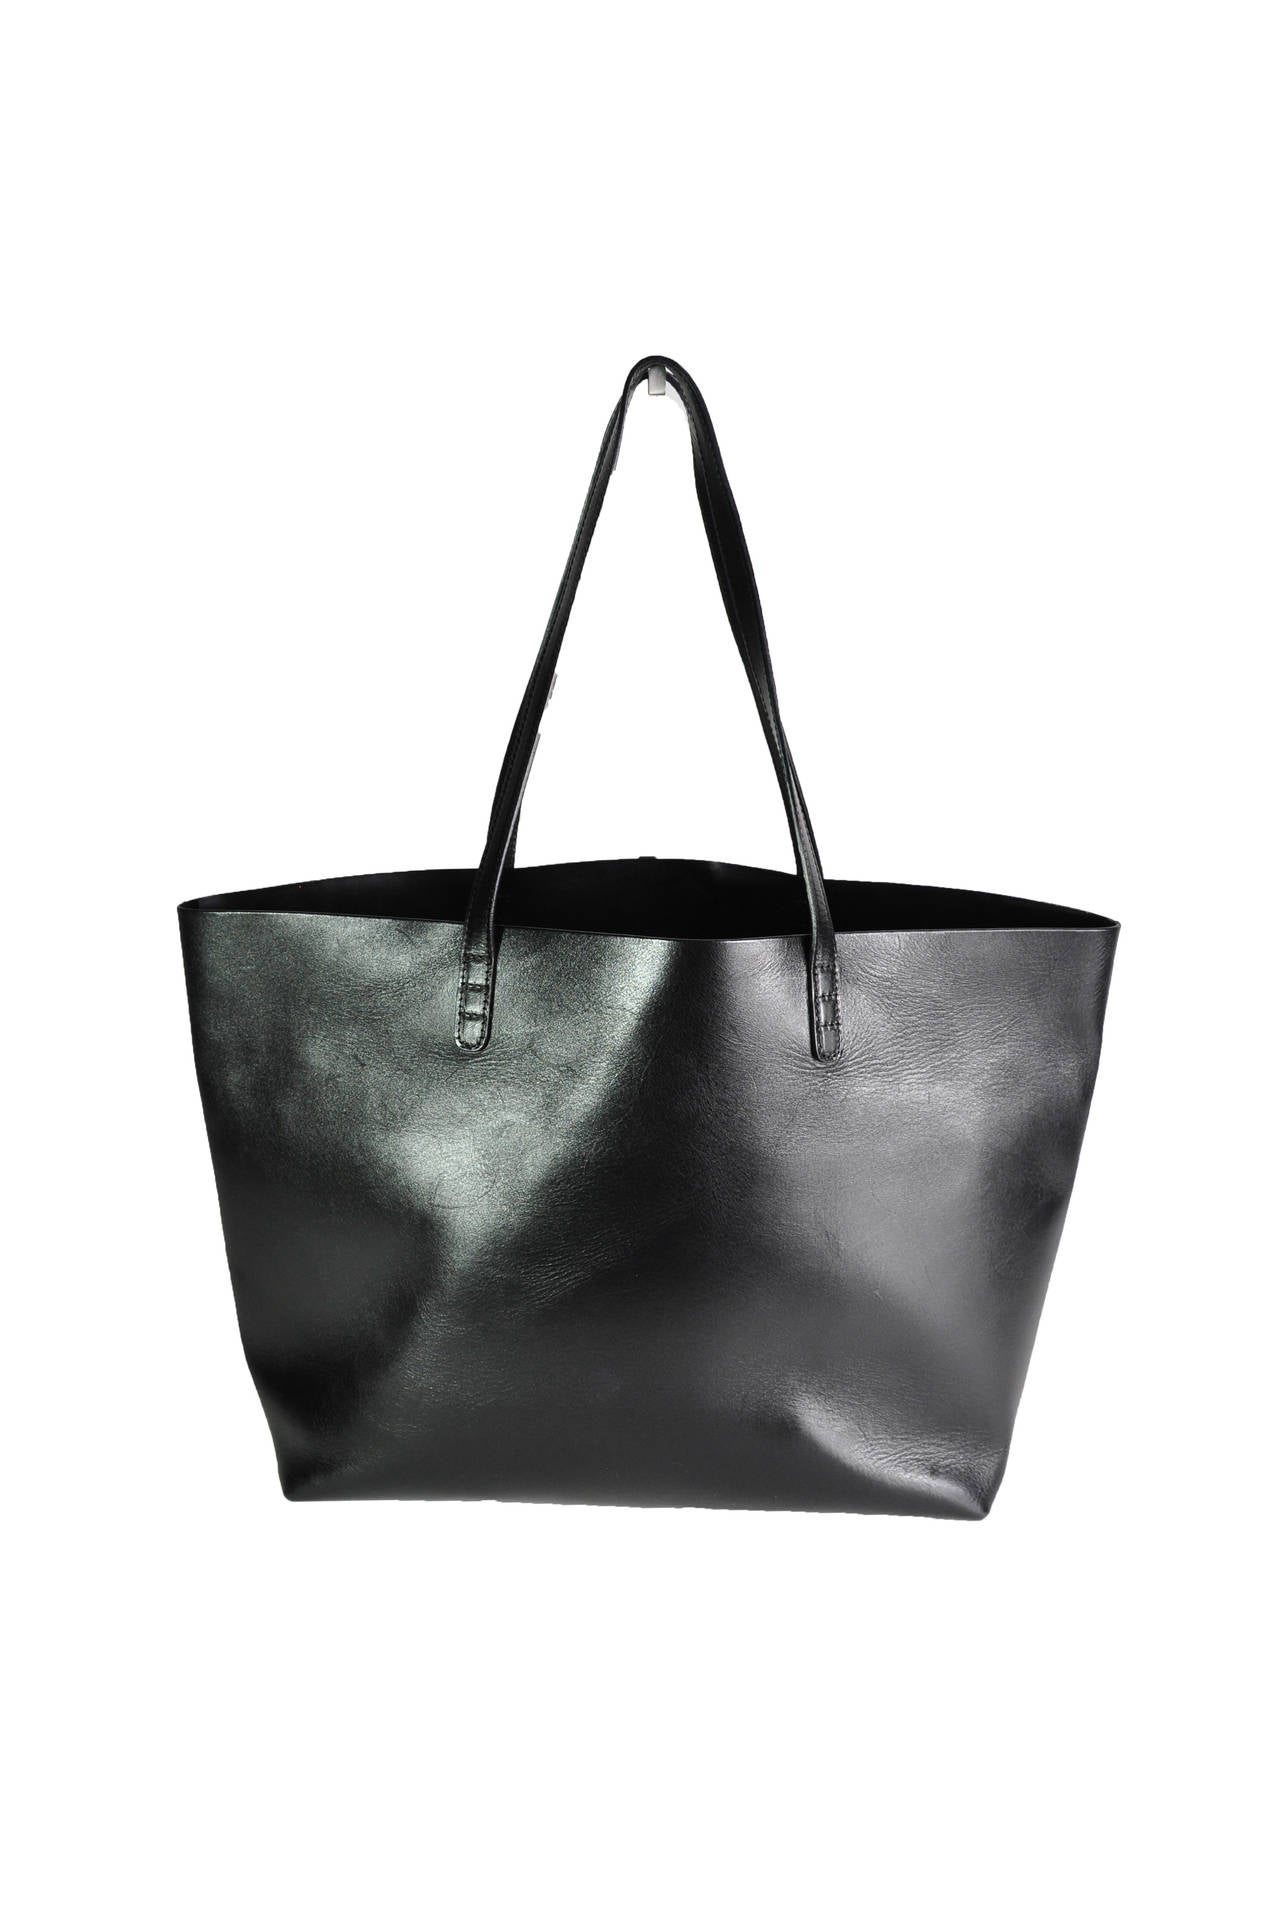 One of the hottest Mansur Gavriel  tote in black calf leather matches with black matte patent interior.  It features with a detachable wallet.
Measurement: Top width: 17.5